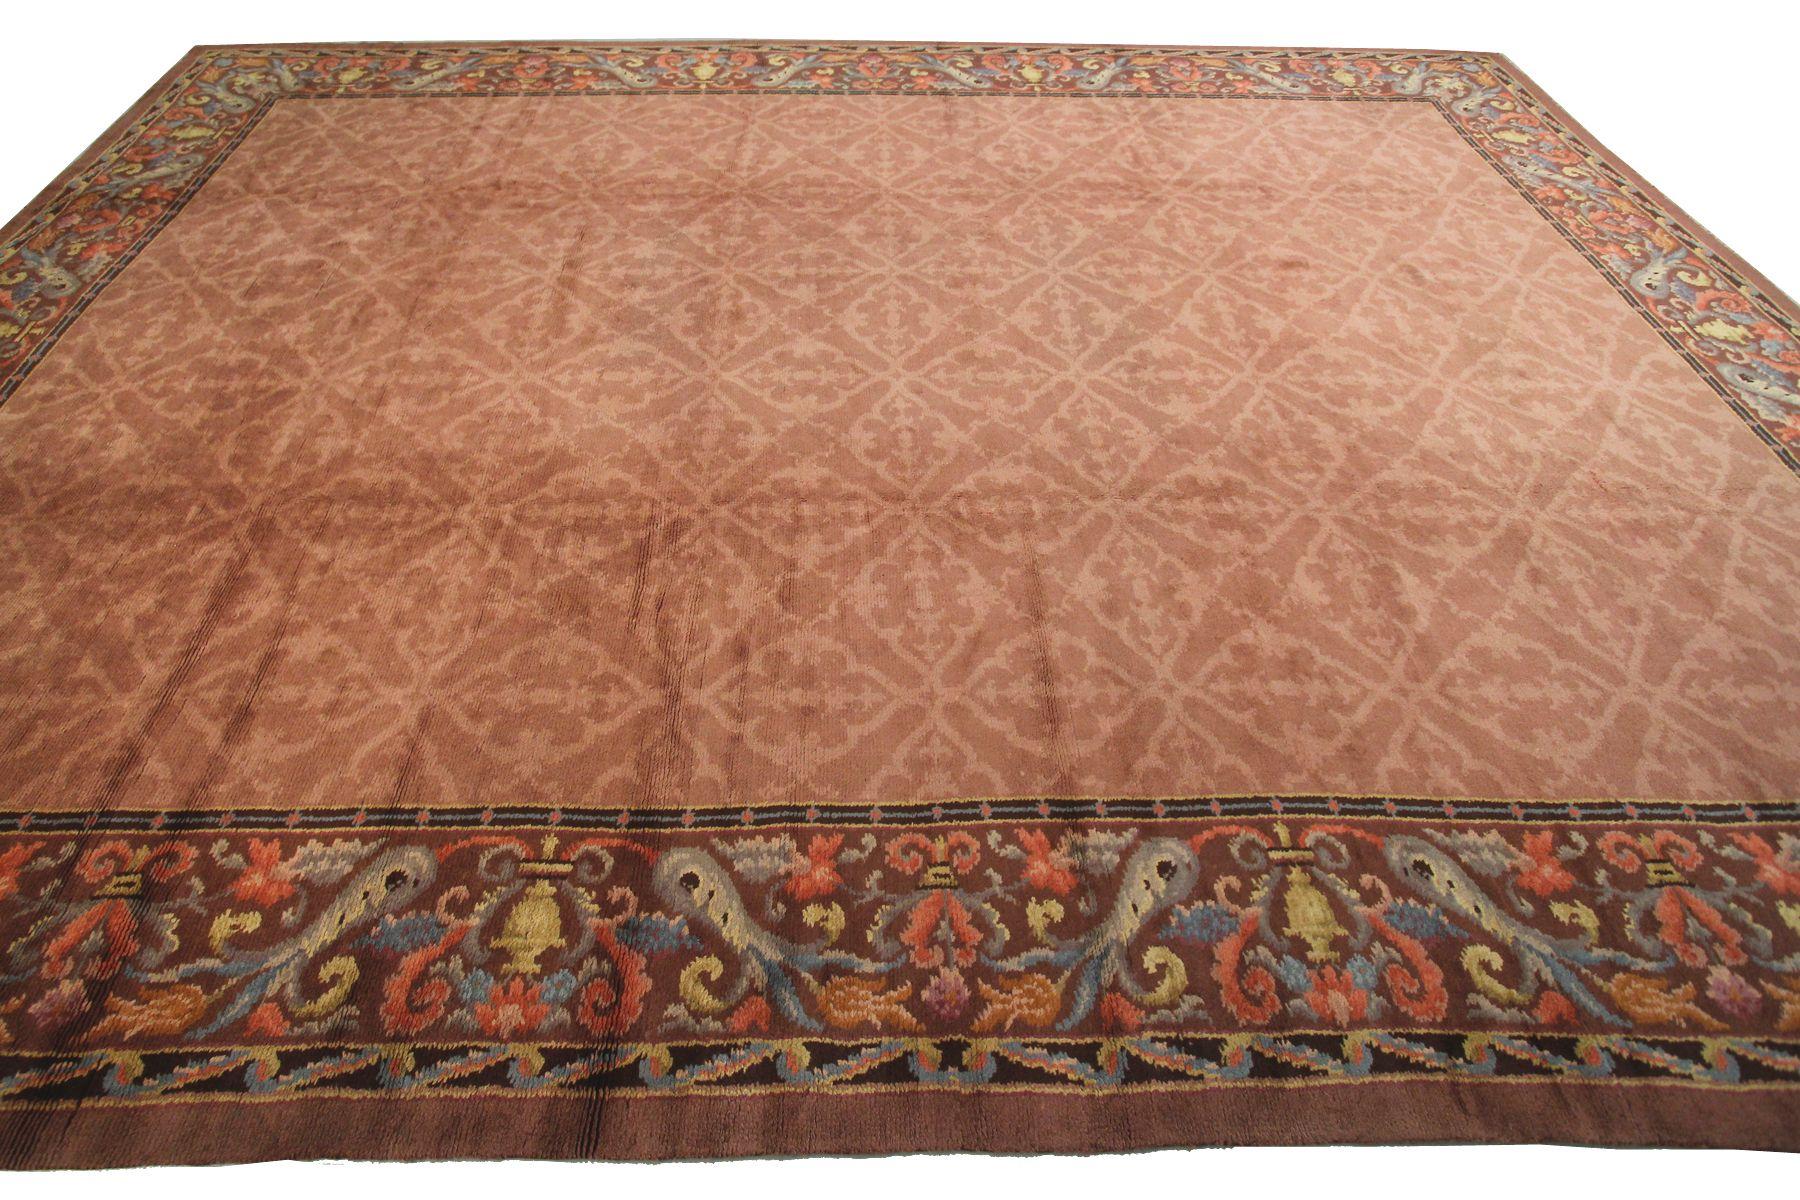 12x17 Exquisite Antique French Savonnerie Aubusson Area rug Rug Rare Rug 

1900

